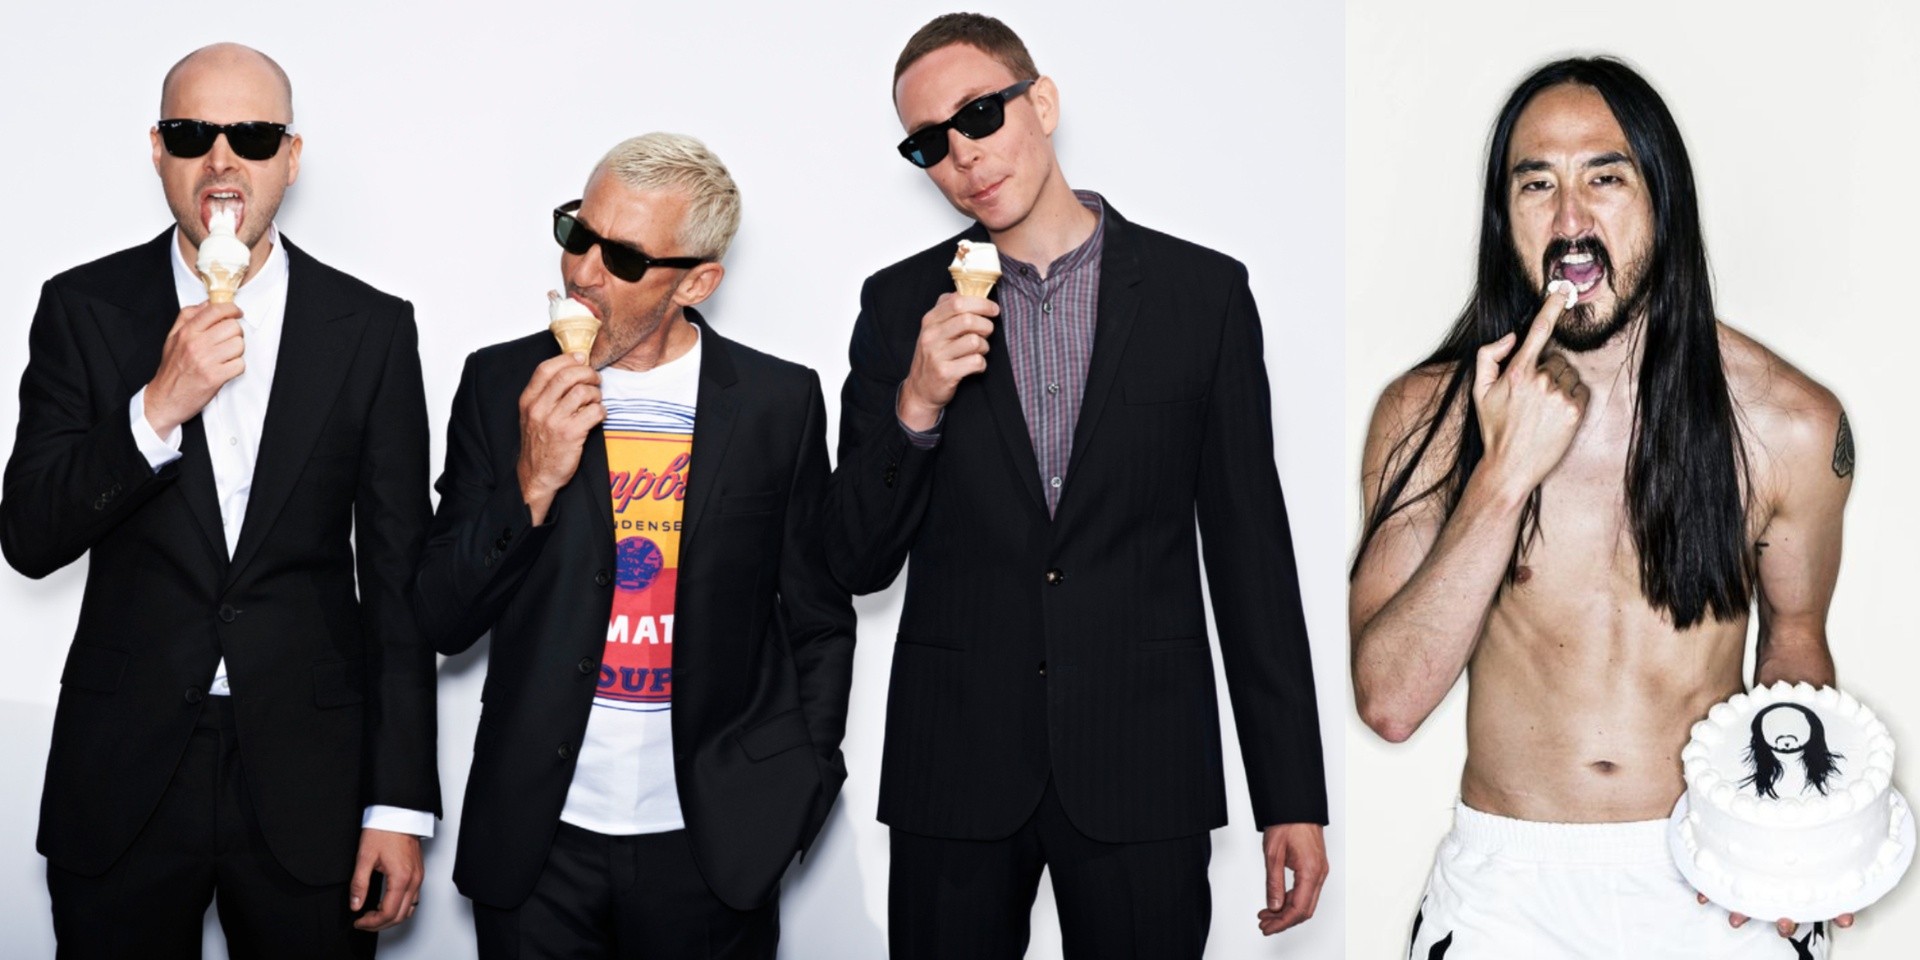 Steve Aoki and Above & Beyond to perform at Marquee Singapore this April